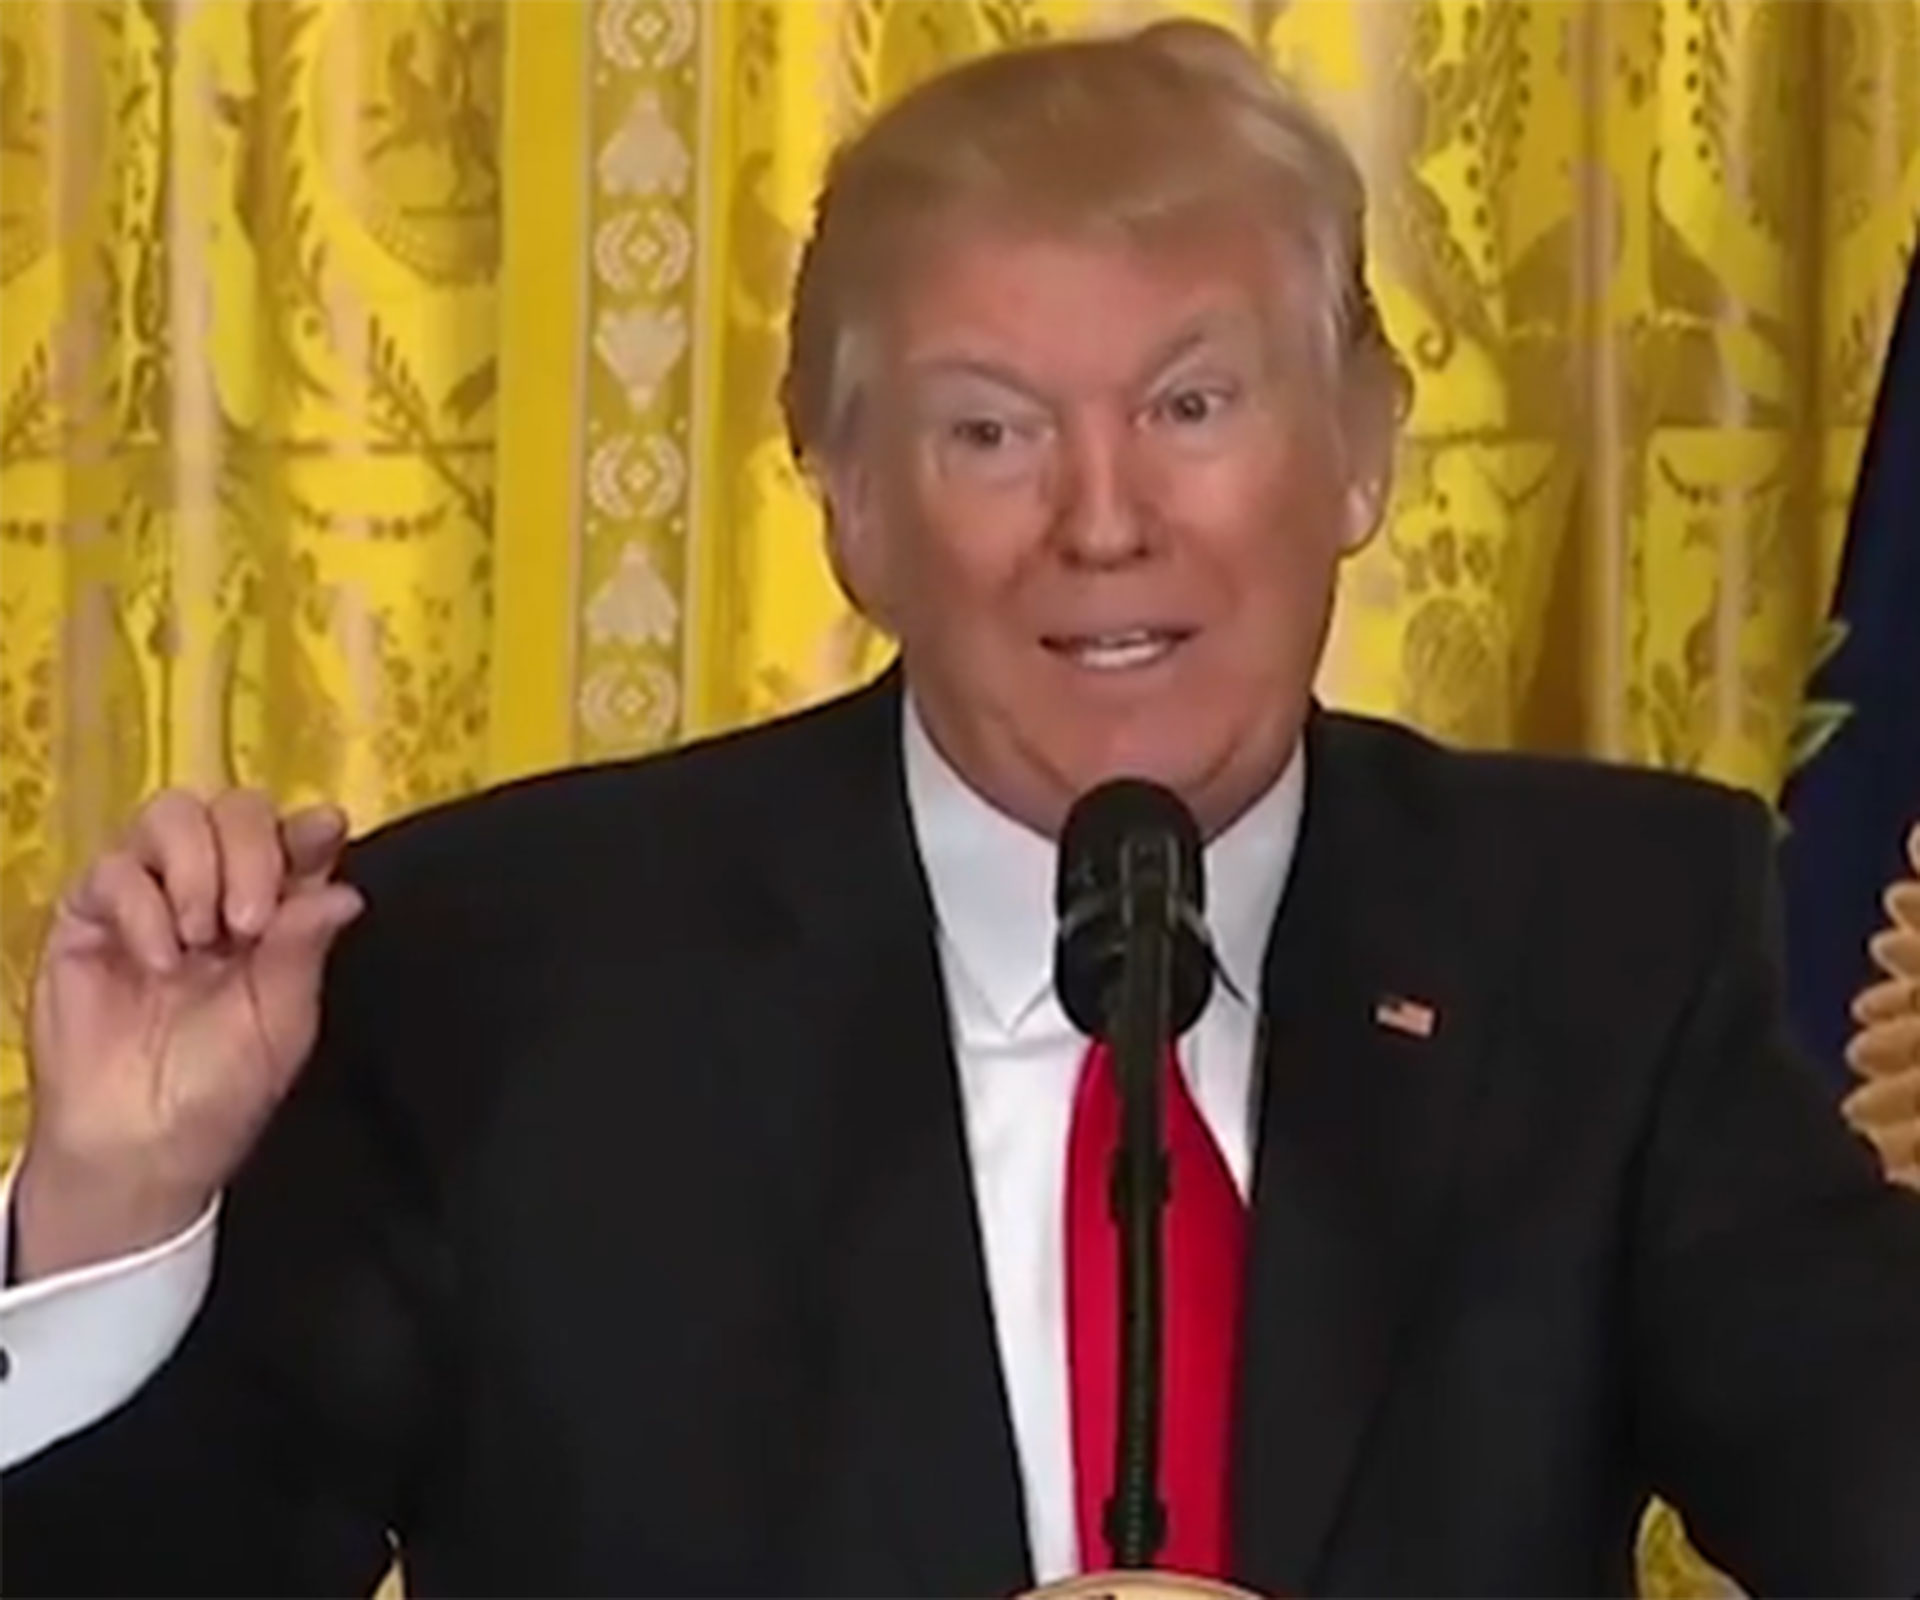 5 of the most batsh*t things President Trump actually said during his press conference